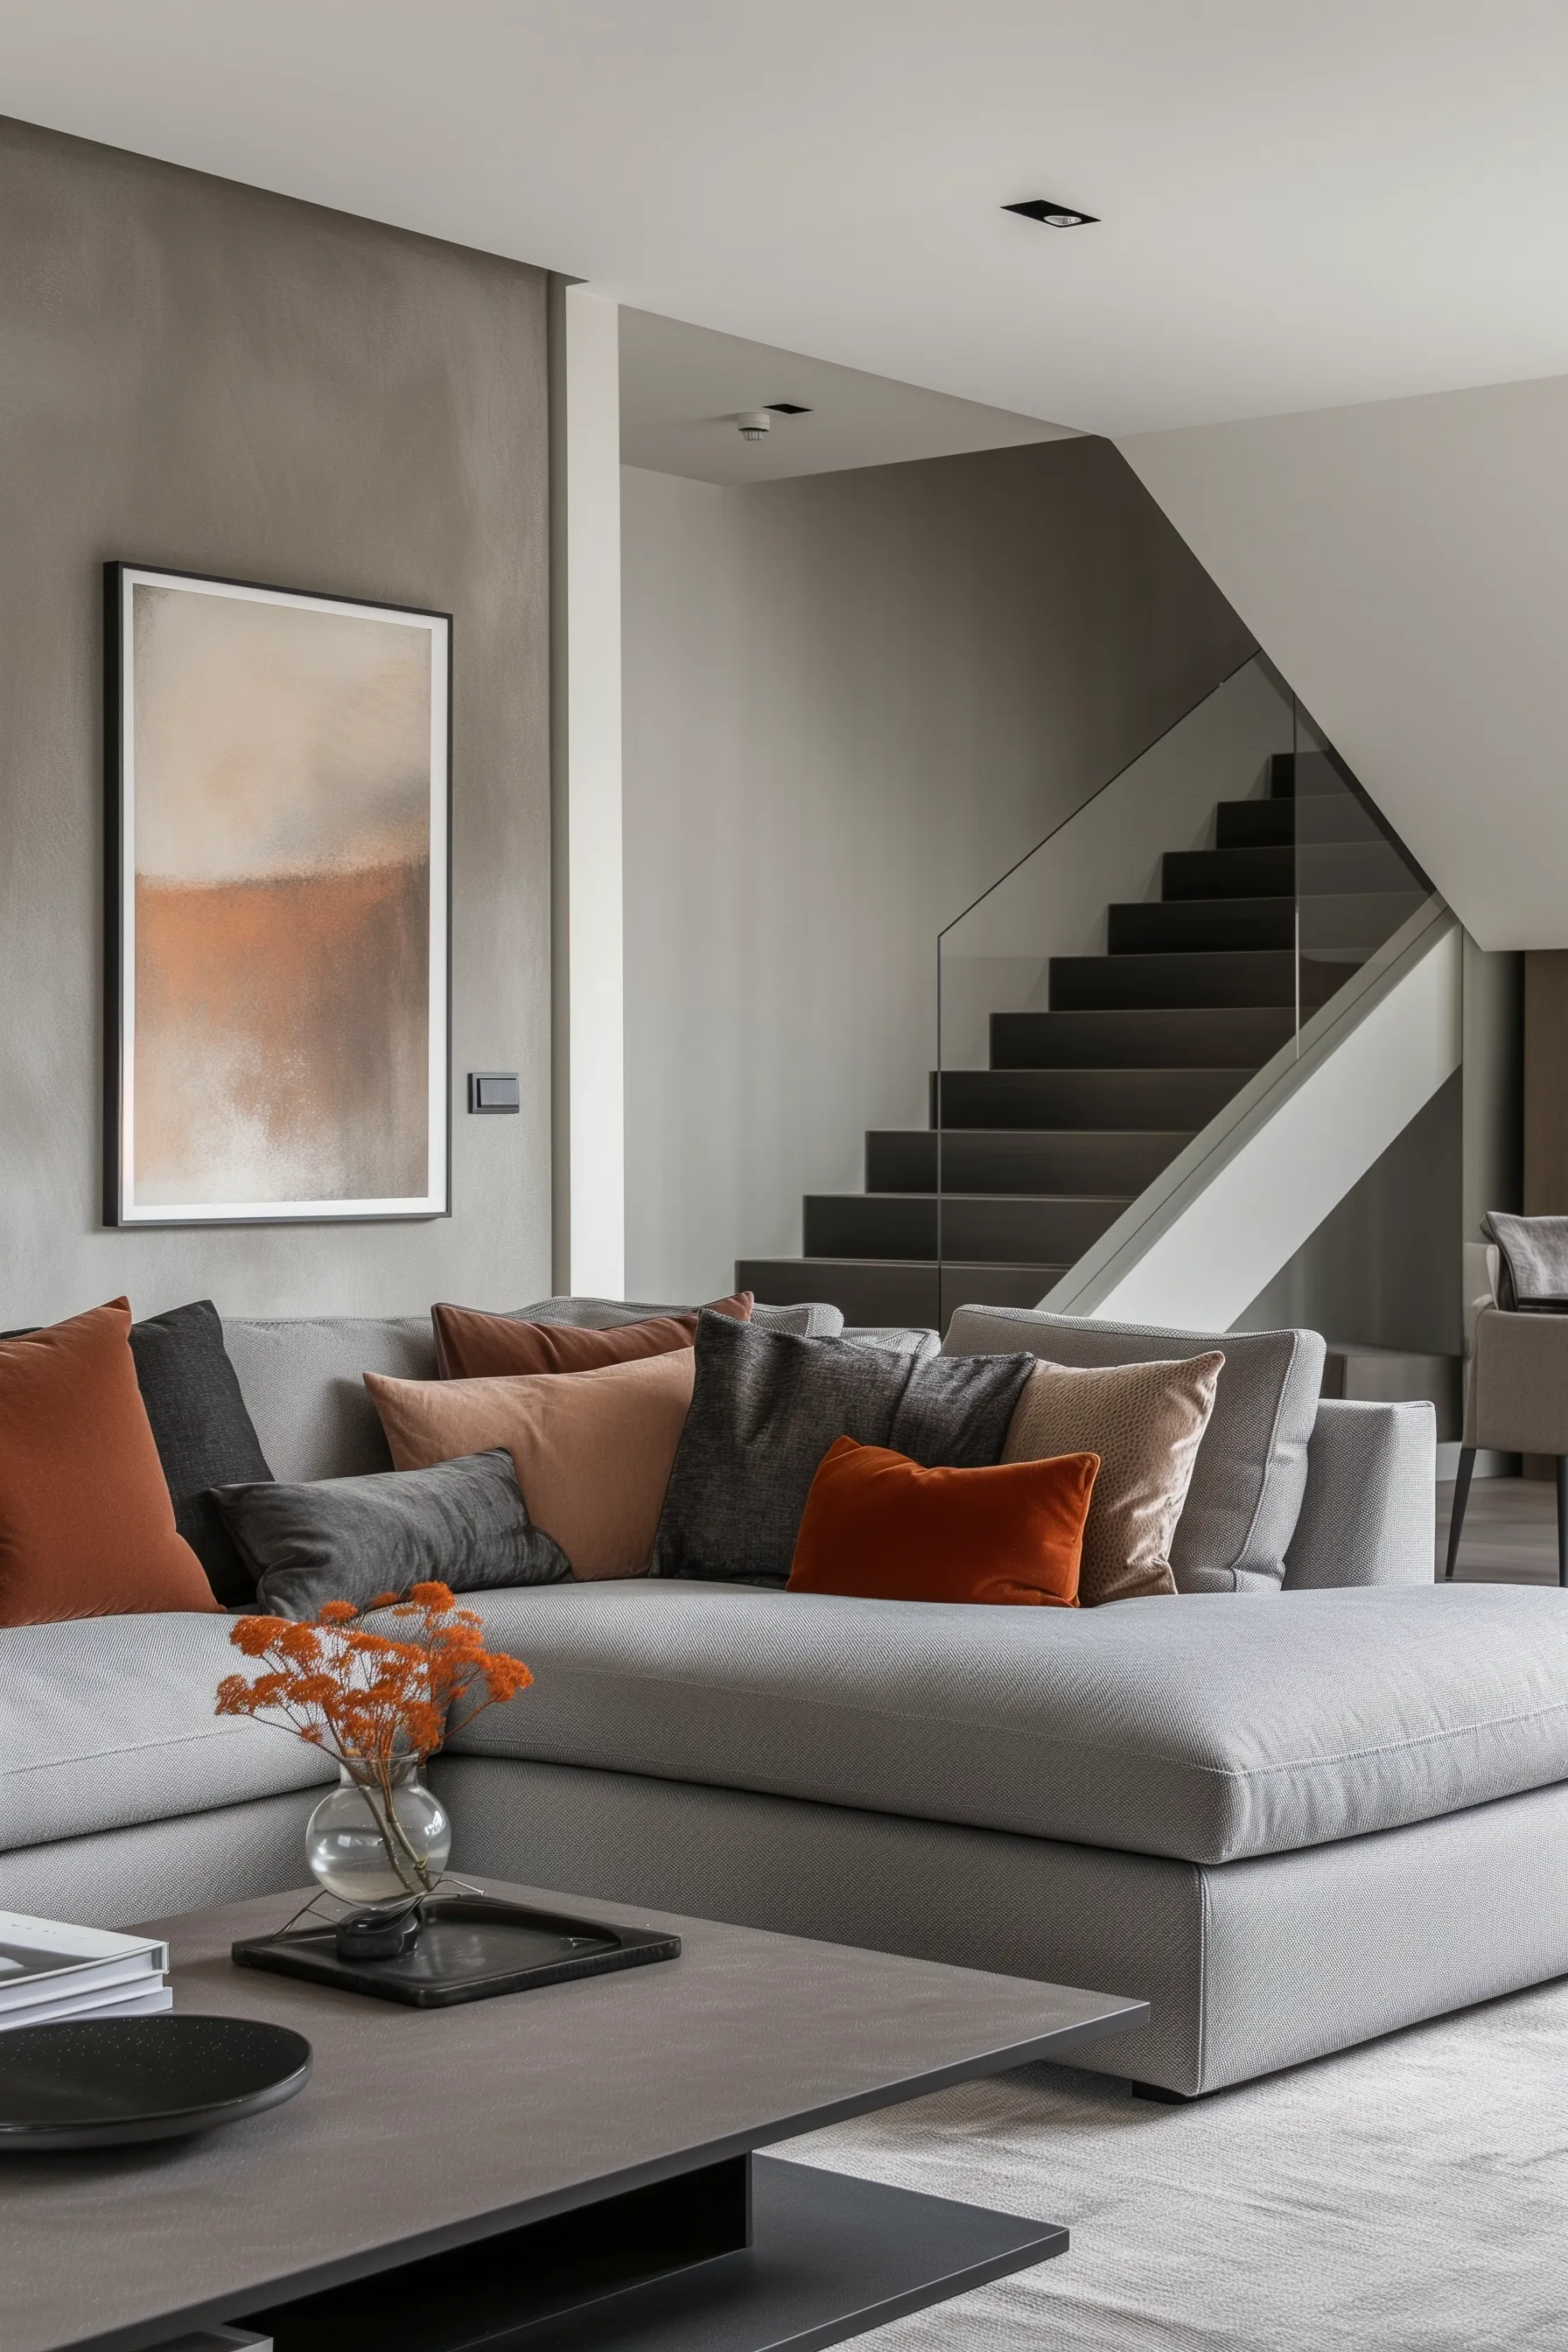 A neutral colored living room with pops of color